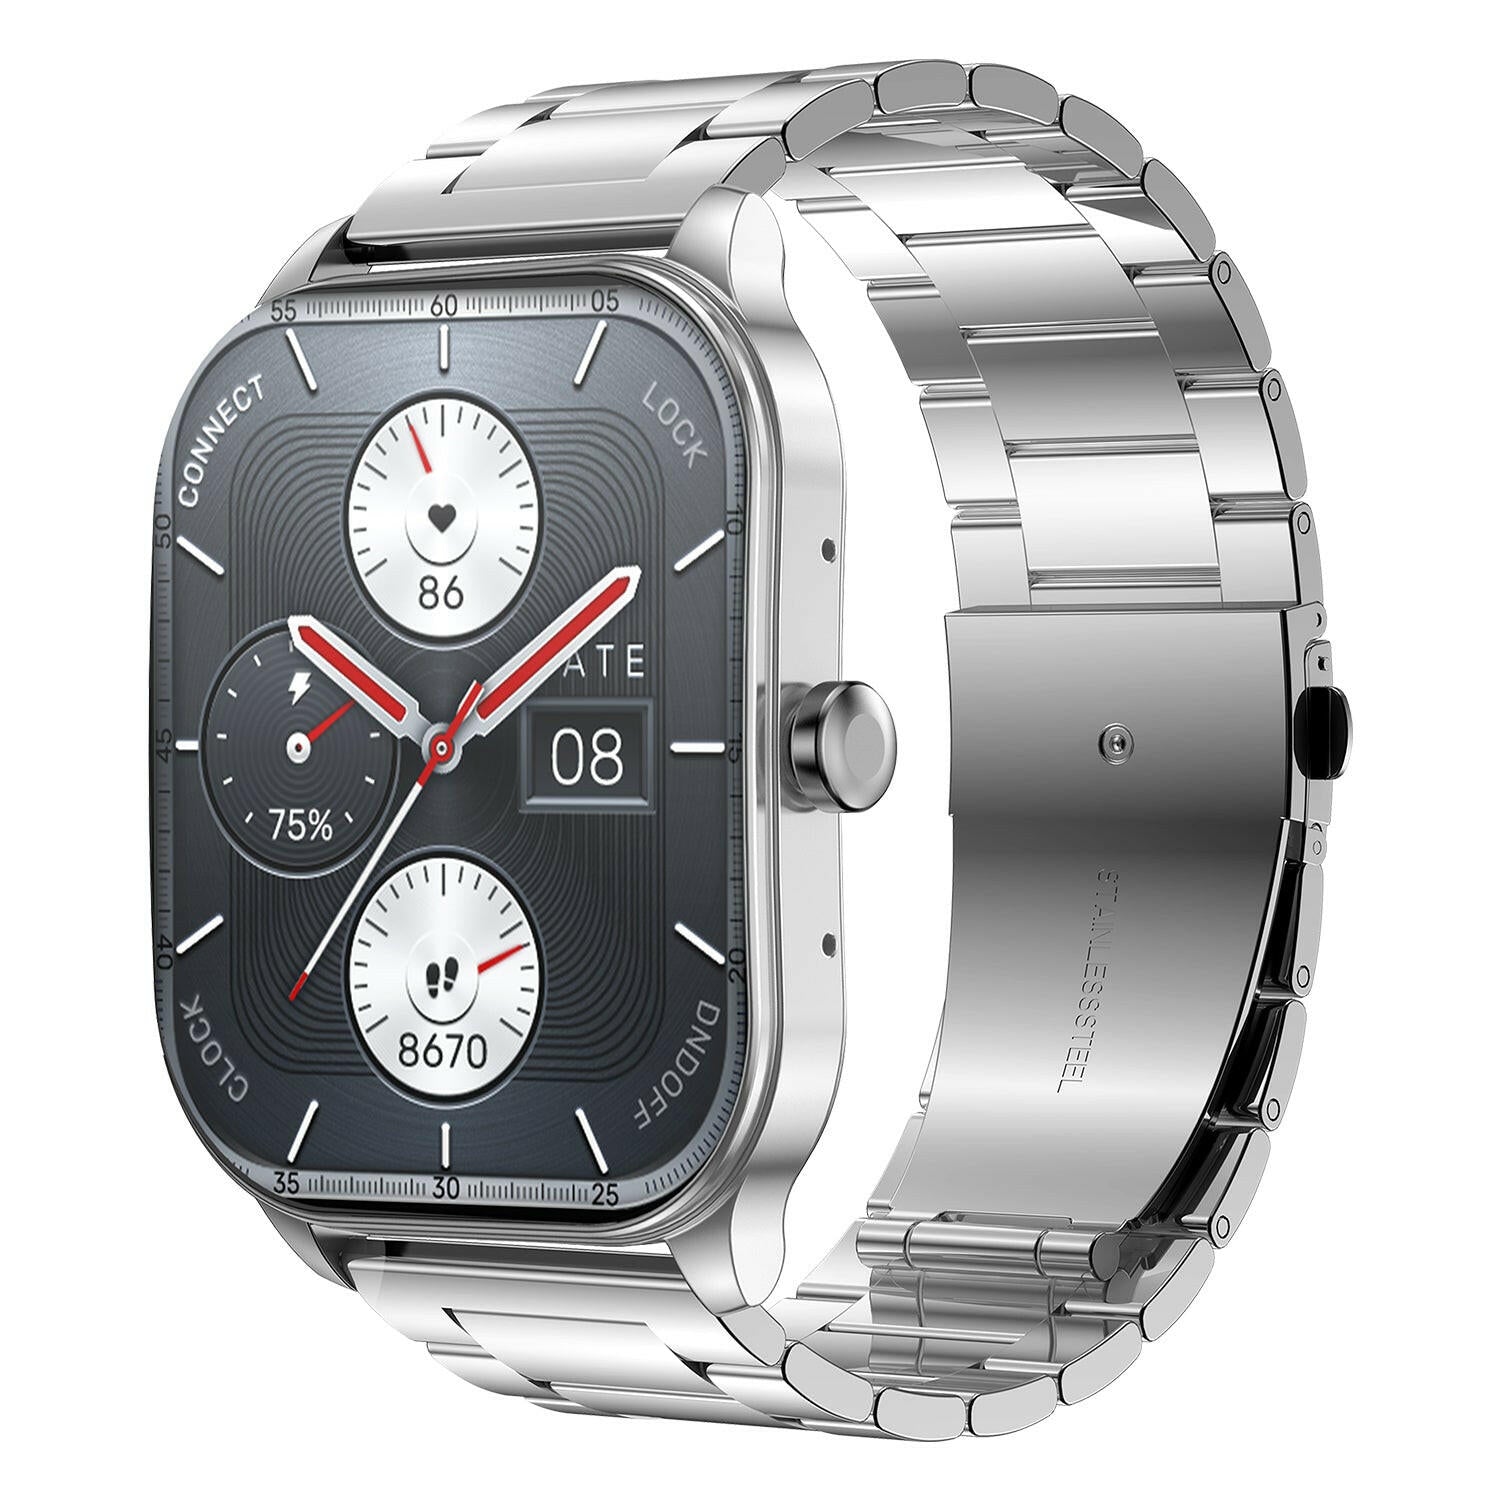 Amazfit Falcon Price in Nepal, Specifications, Availability